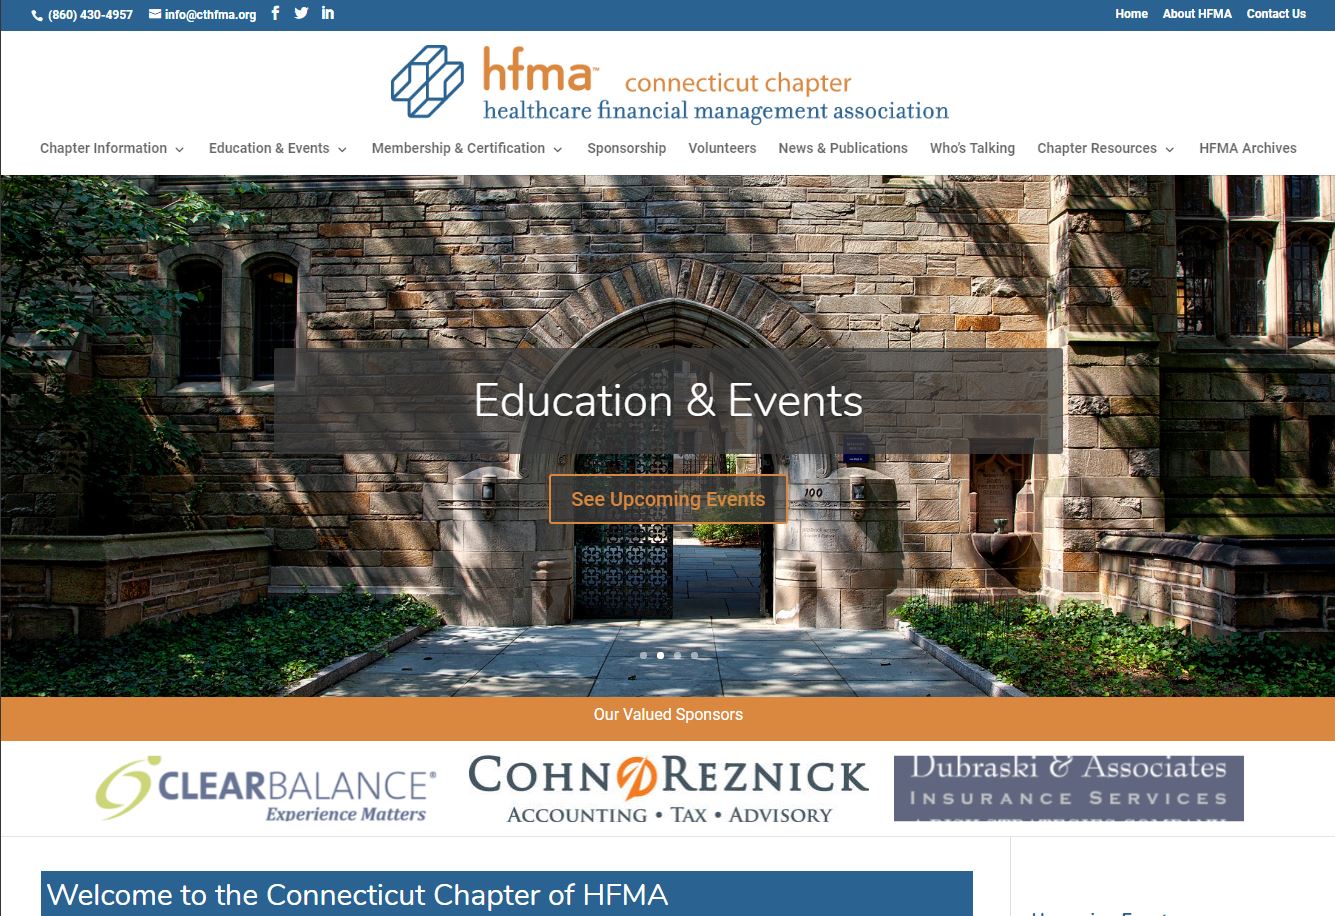 HFMA Connecticut Chapter